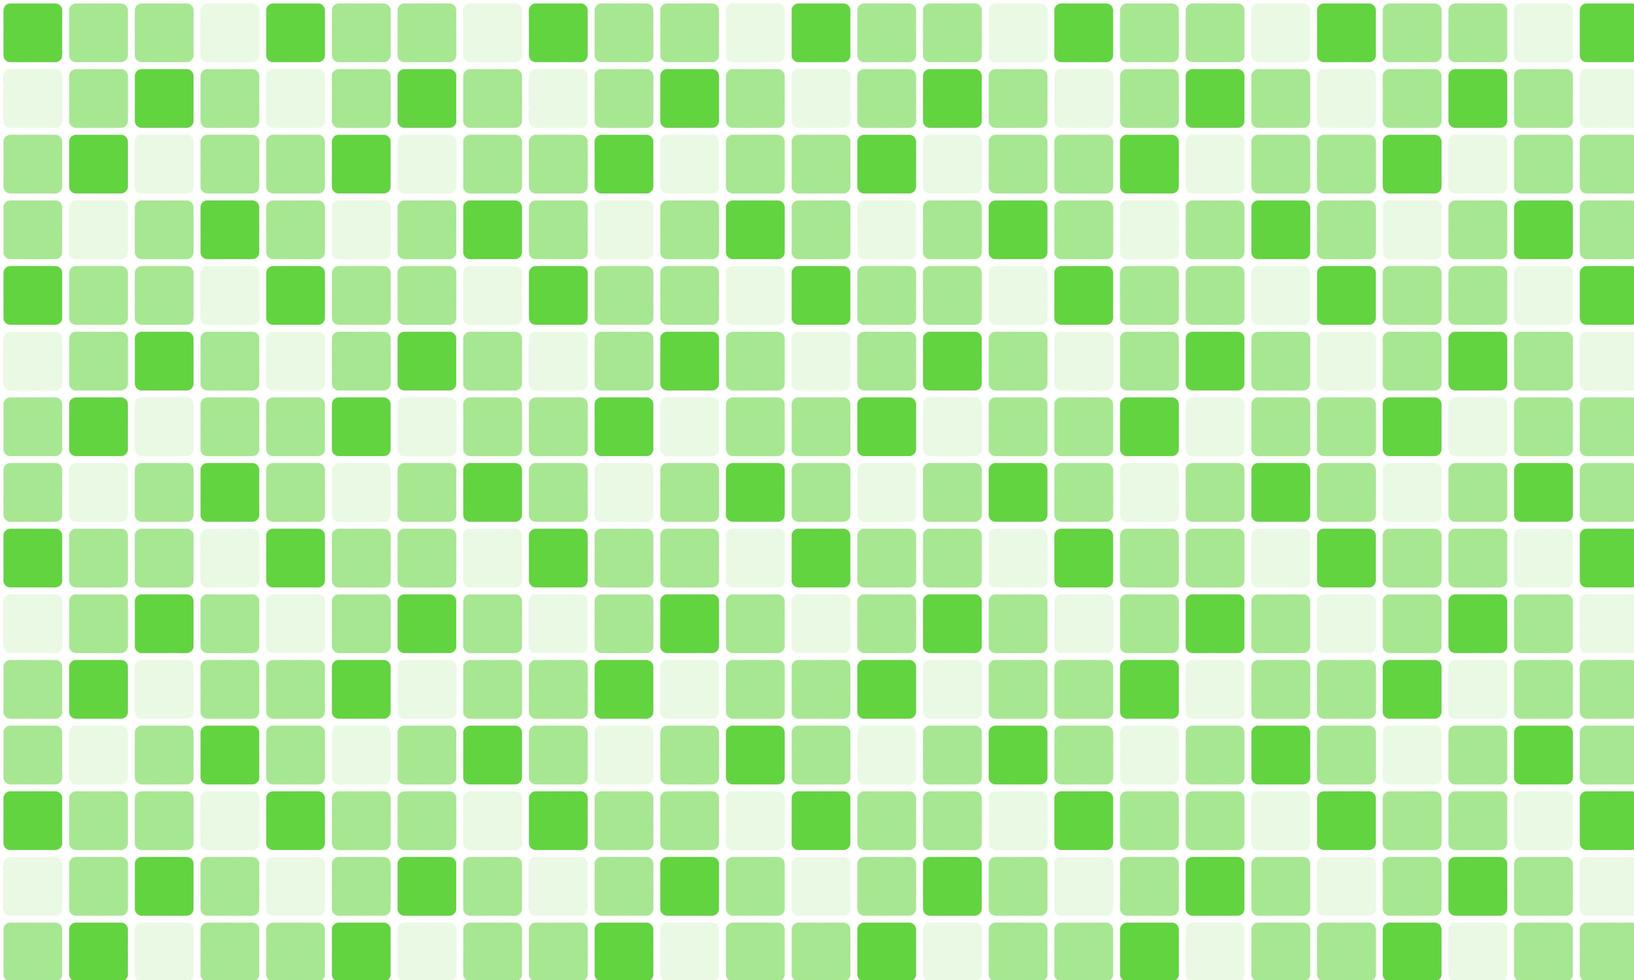 Green Floor Tile Checkered Pattern Background photo